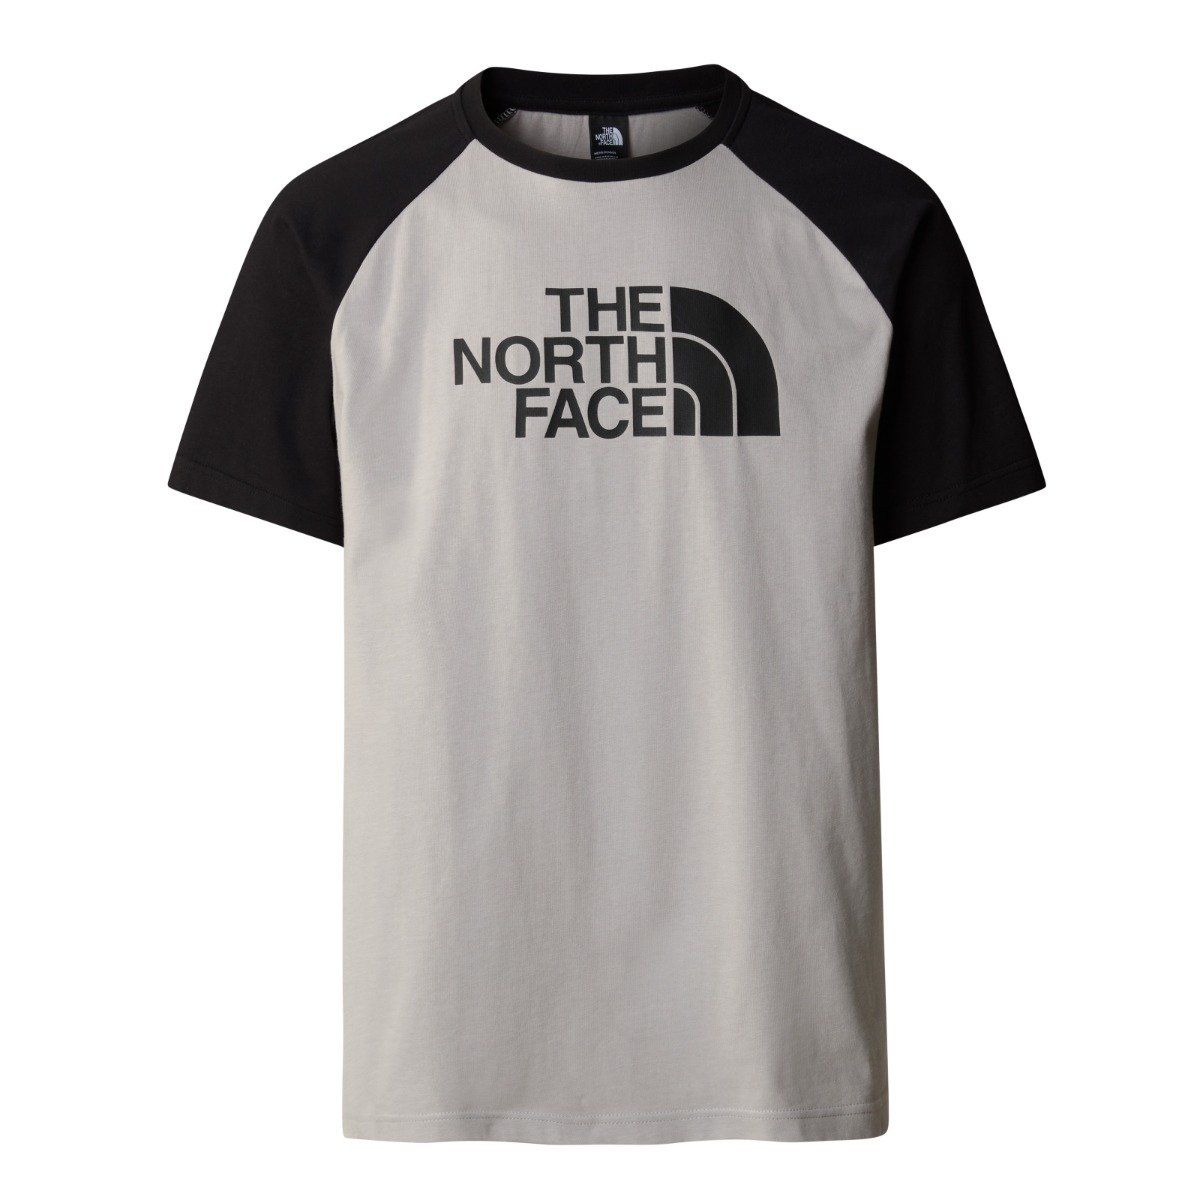 The North Face - M's S/S Raglan Easy Tee